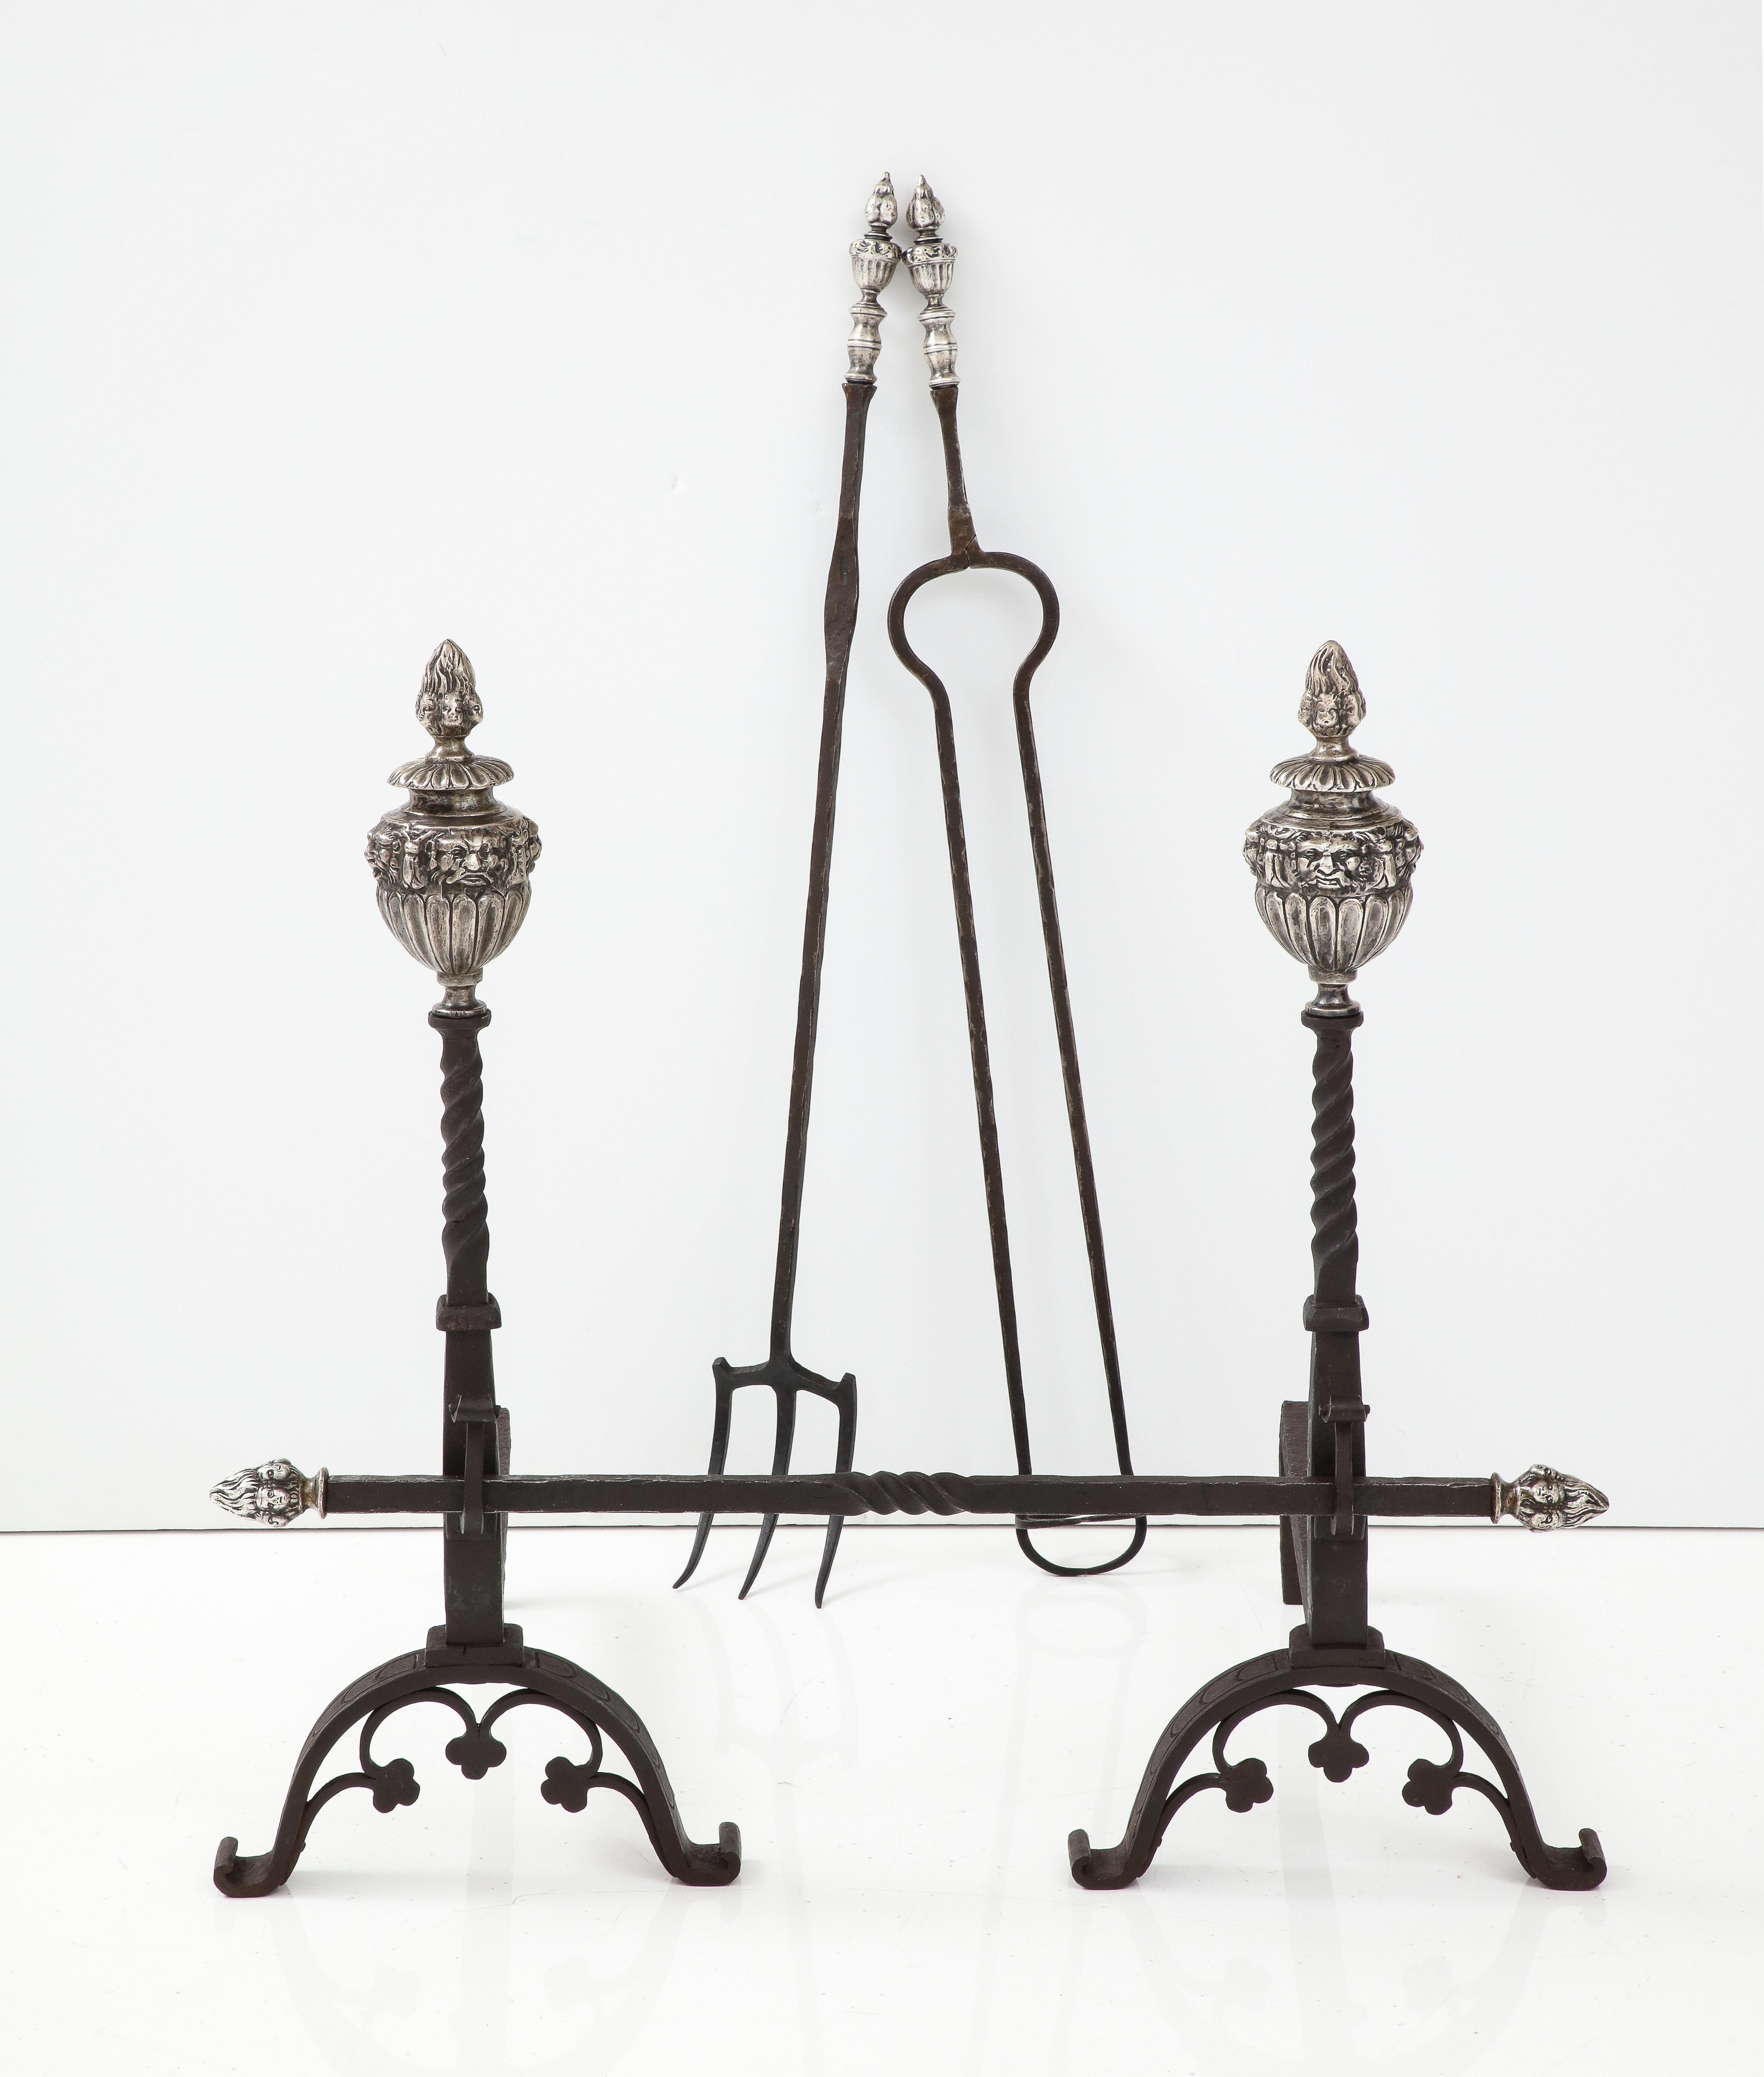 Stunning set of 1890's large andirons with matching fireplace tools, made of solid iron and bronze the finials have been nickel plated, all the finials have faces decorative motif, these pieces come from a mansion in Southampton, NY in vintage